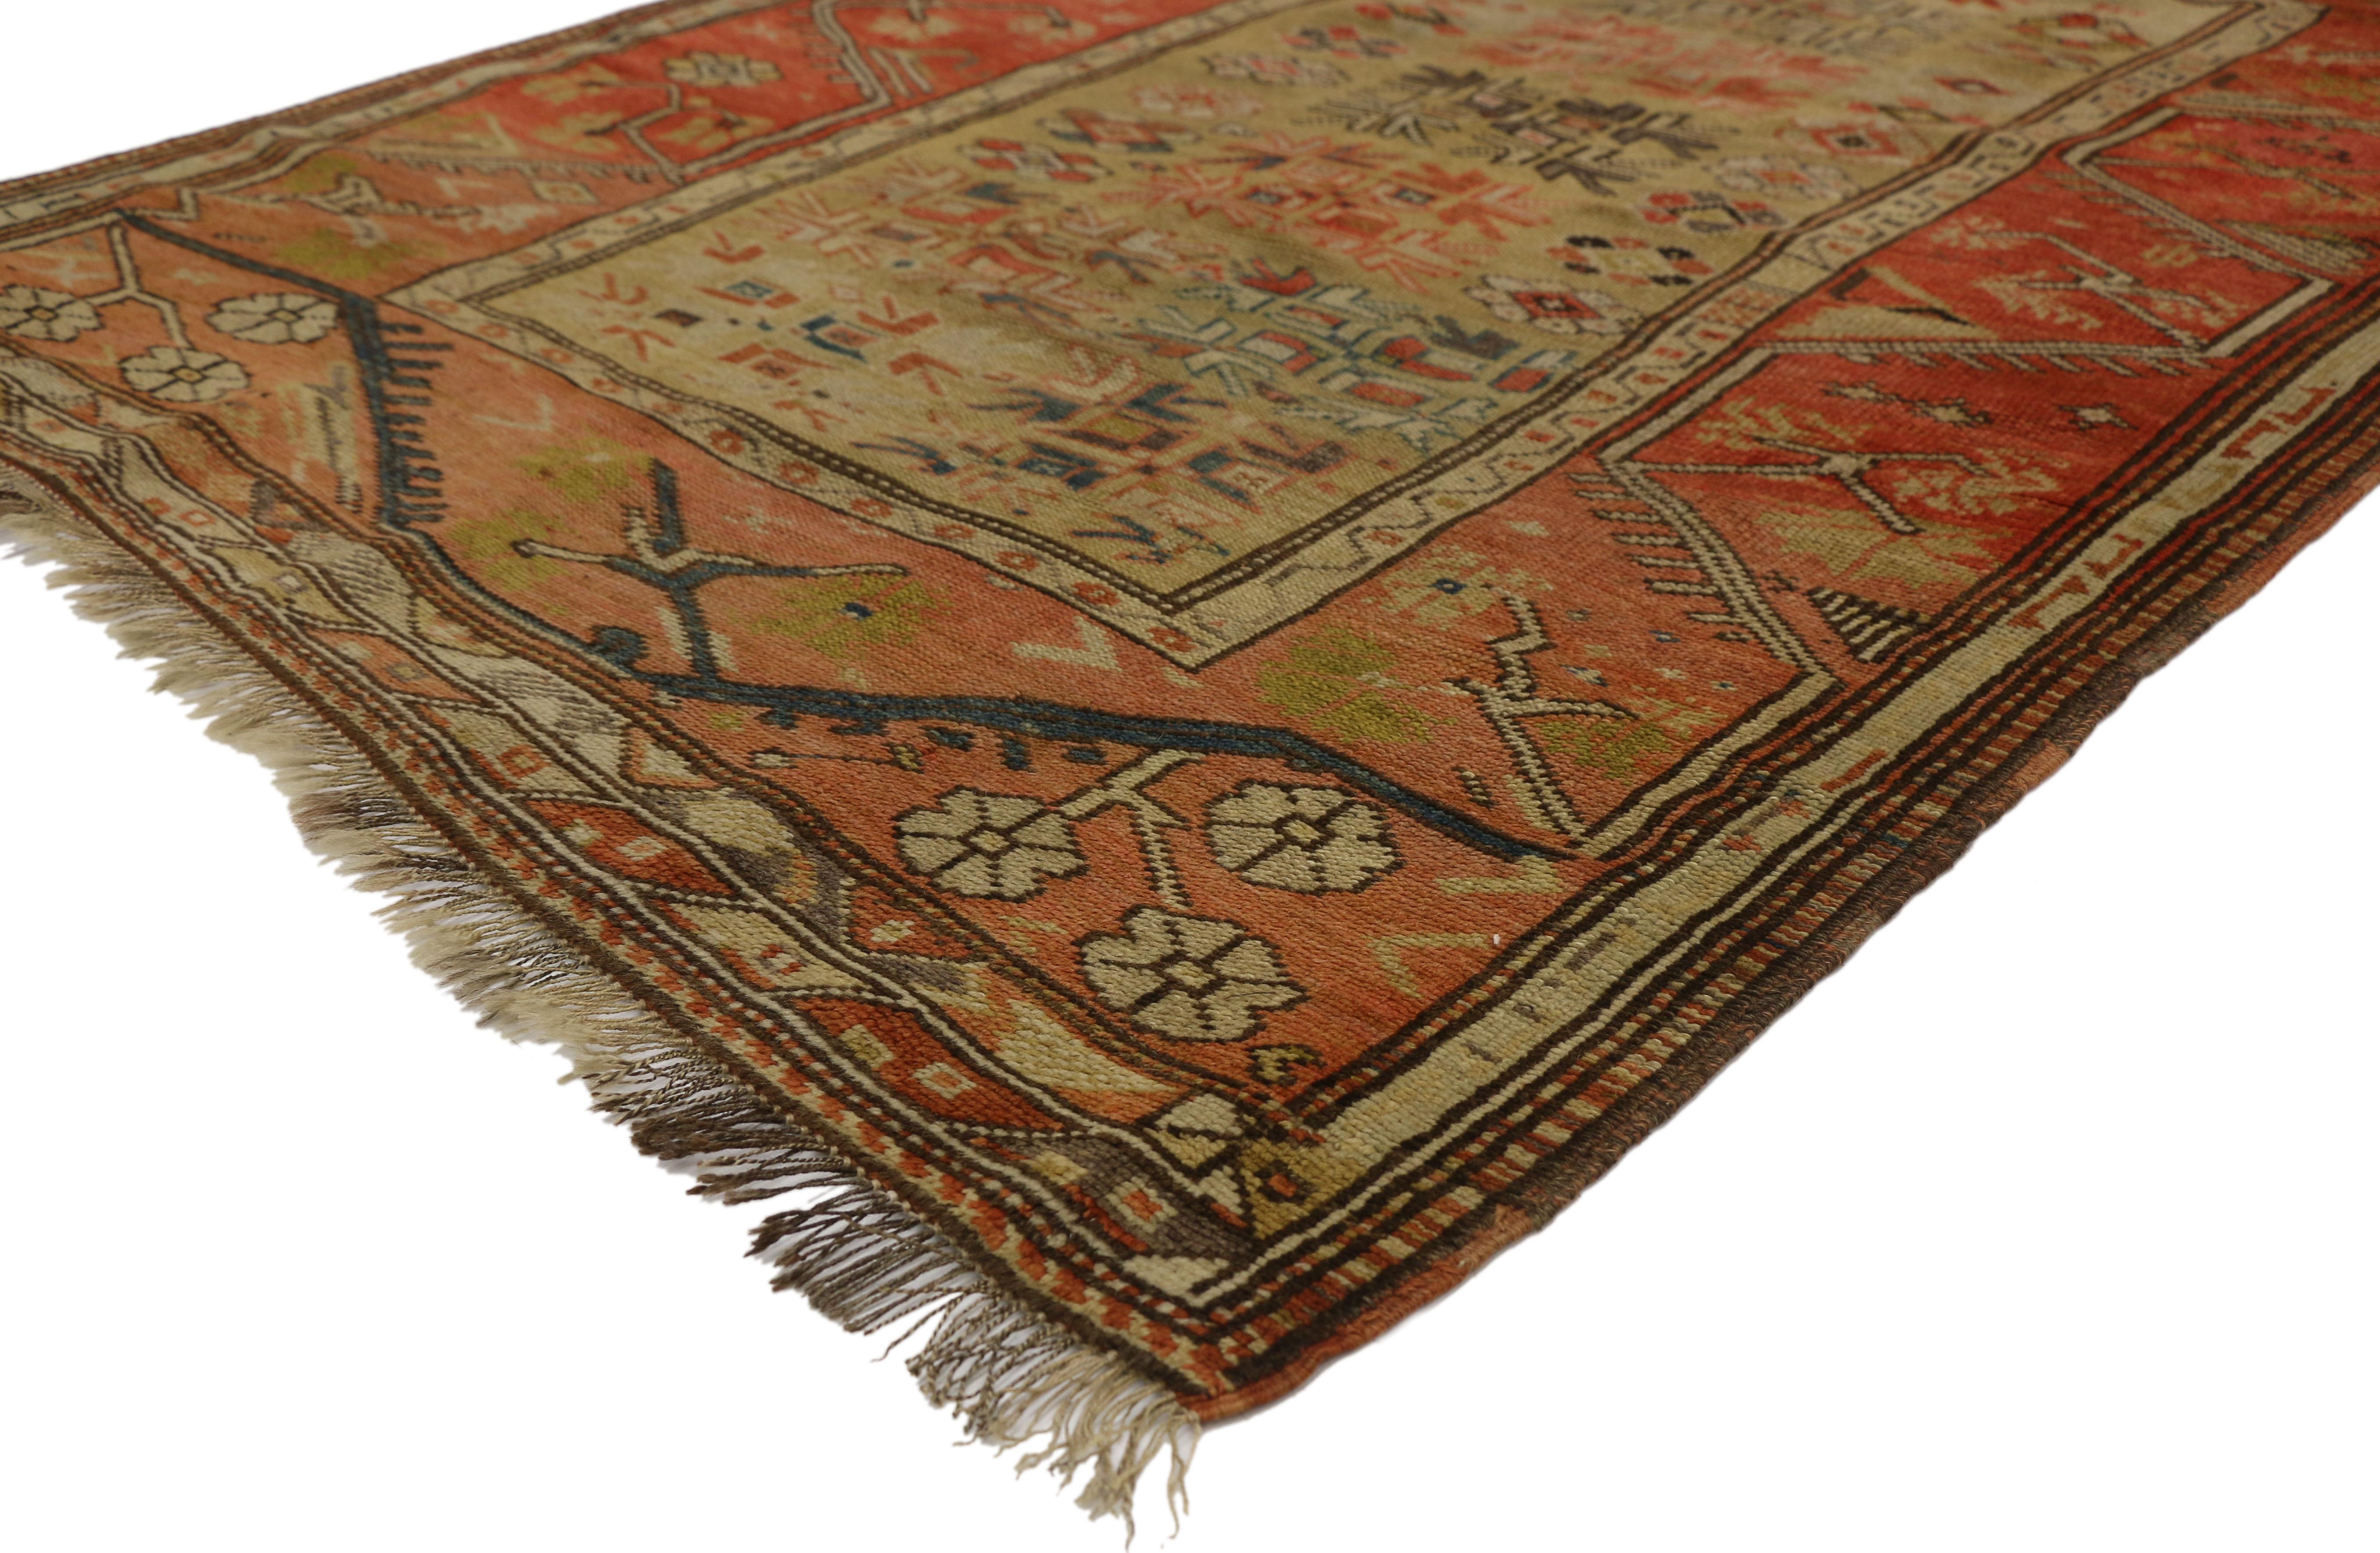 77324 Distressed Antique Turkish Oushak Accent Rug with Rustic Arts & Crafts Style 04'01 x 05'04. Highlighting modern design aesthetics and subdued elegance with a pop of color, this late 19th century antique Oushak rug beautifully embodies rustic